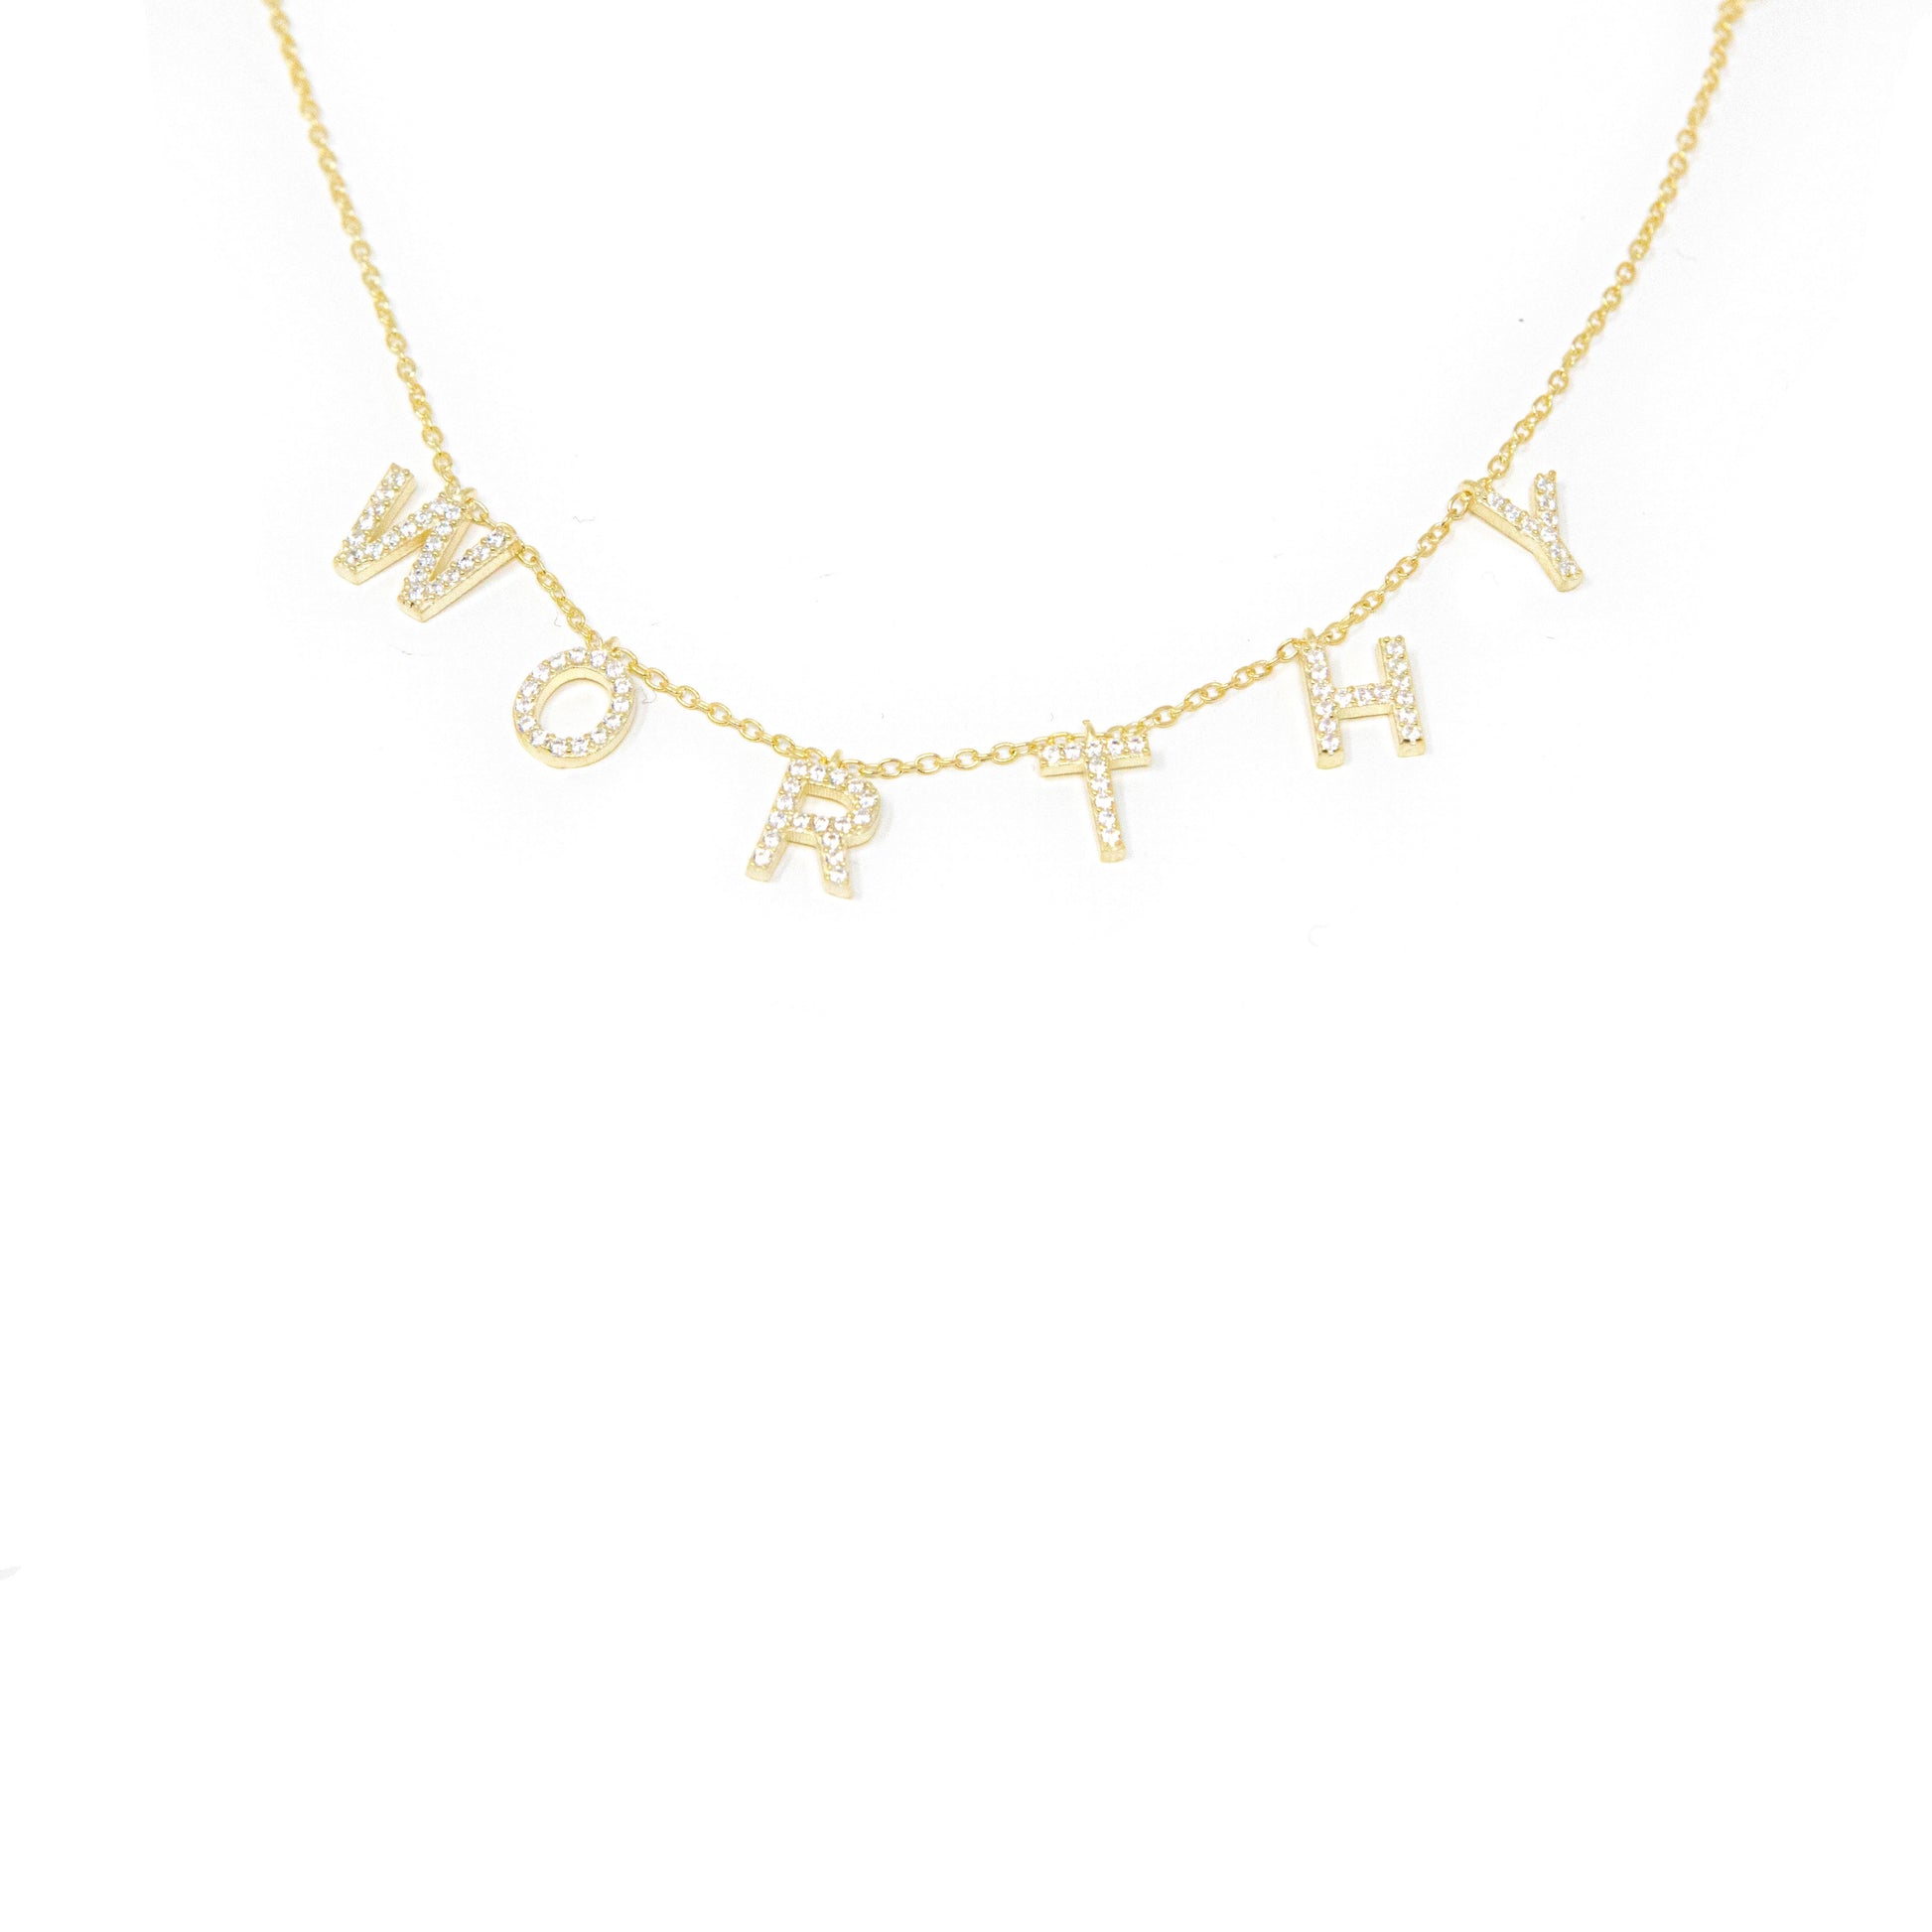 Ready To Ship It's All in a Name™ Necklace JEWELRY The Sis Kiss Worthy Gold with Crystals